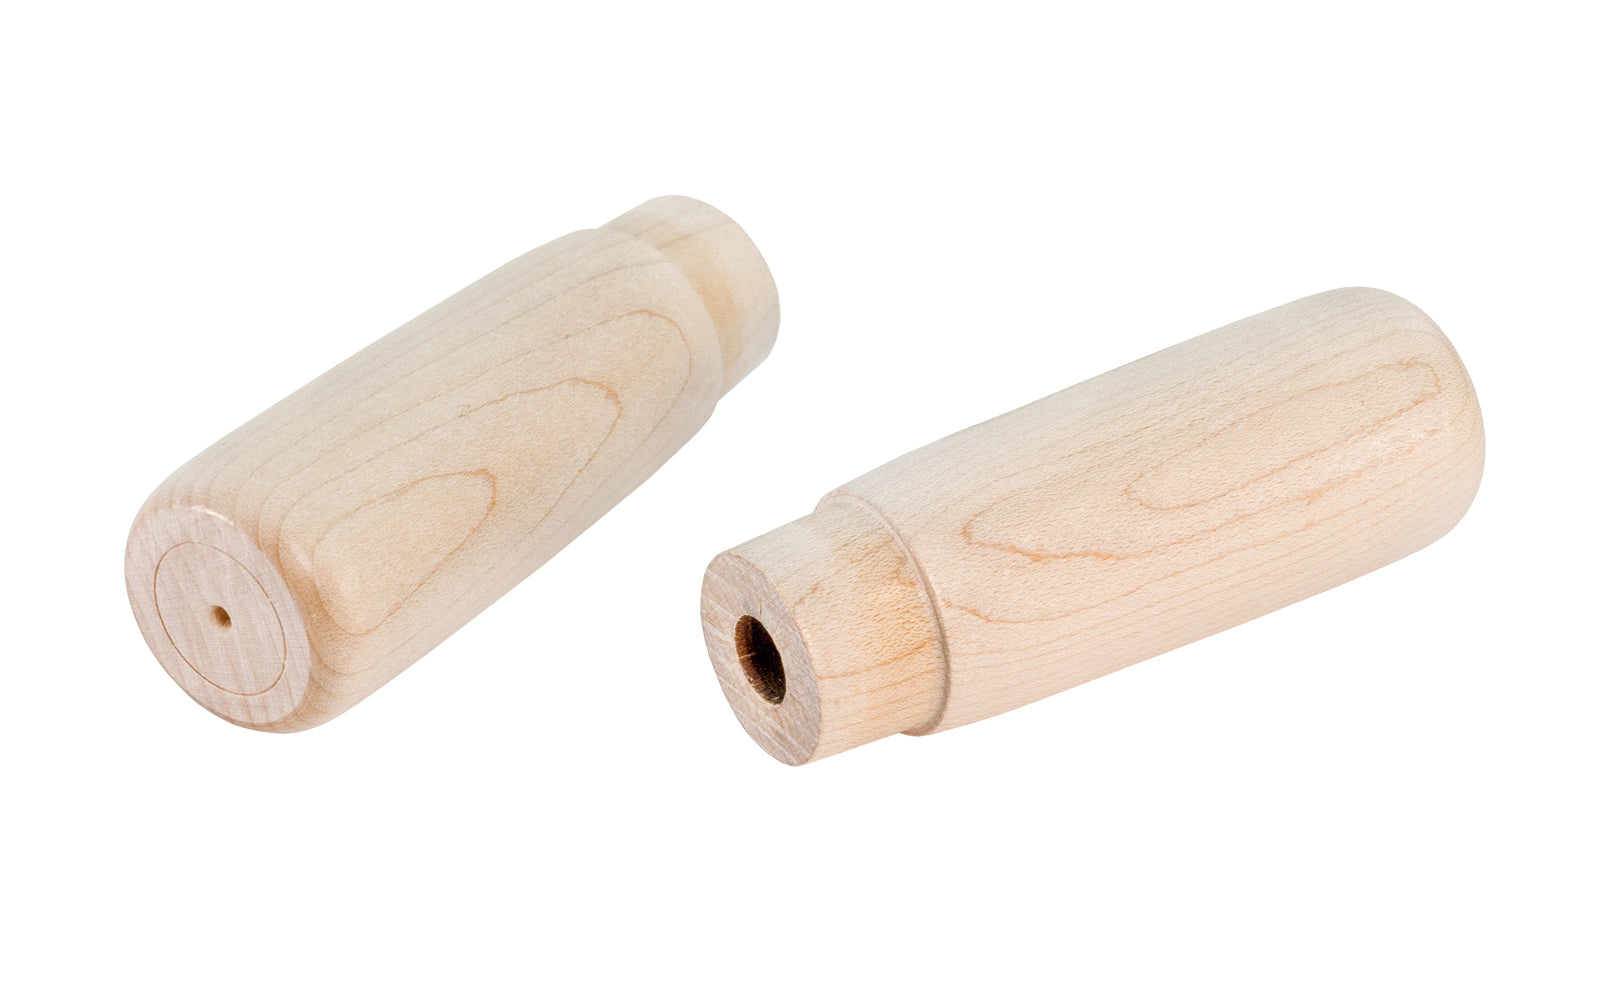 Dubuque Replacement Wood Handles for Dubuque Handscrew Clamps.    Made in USA.